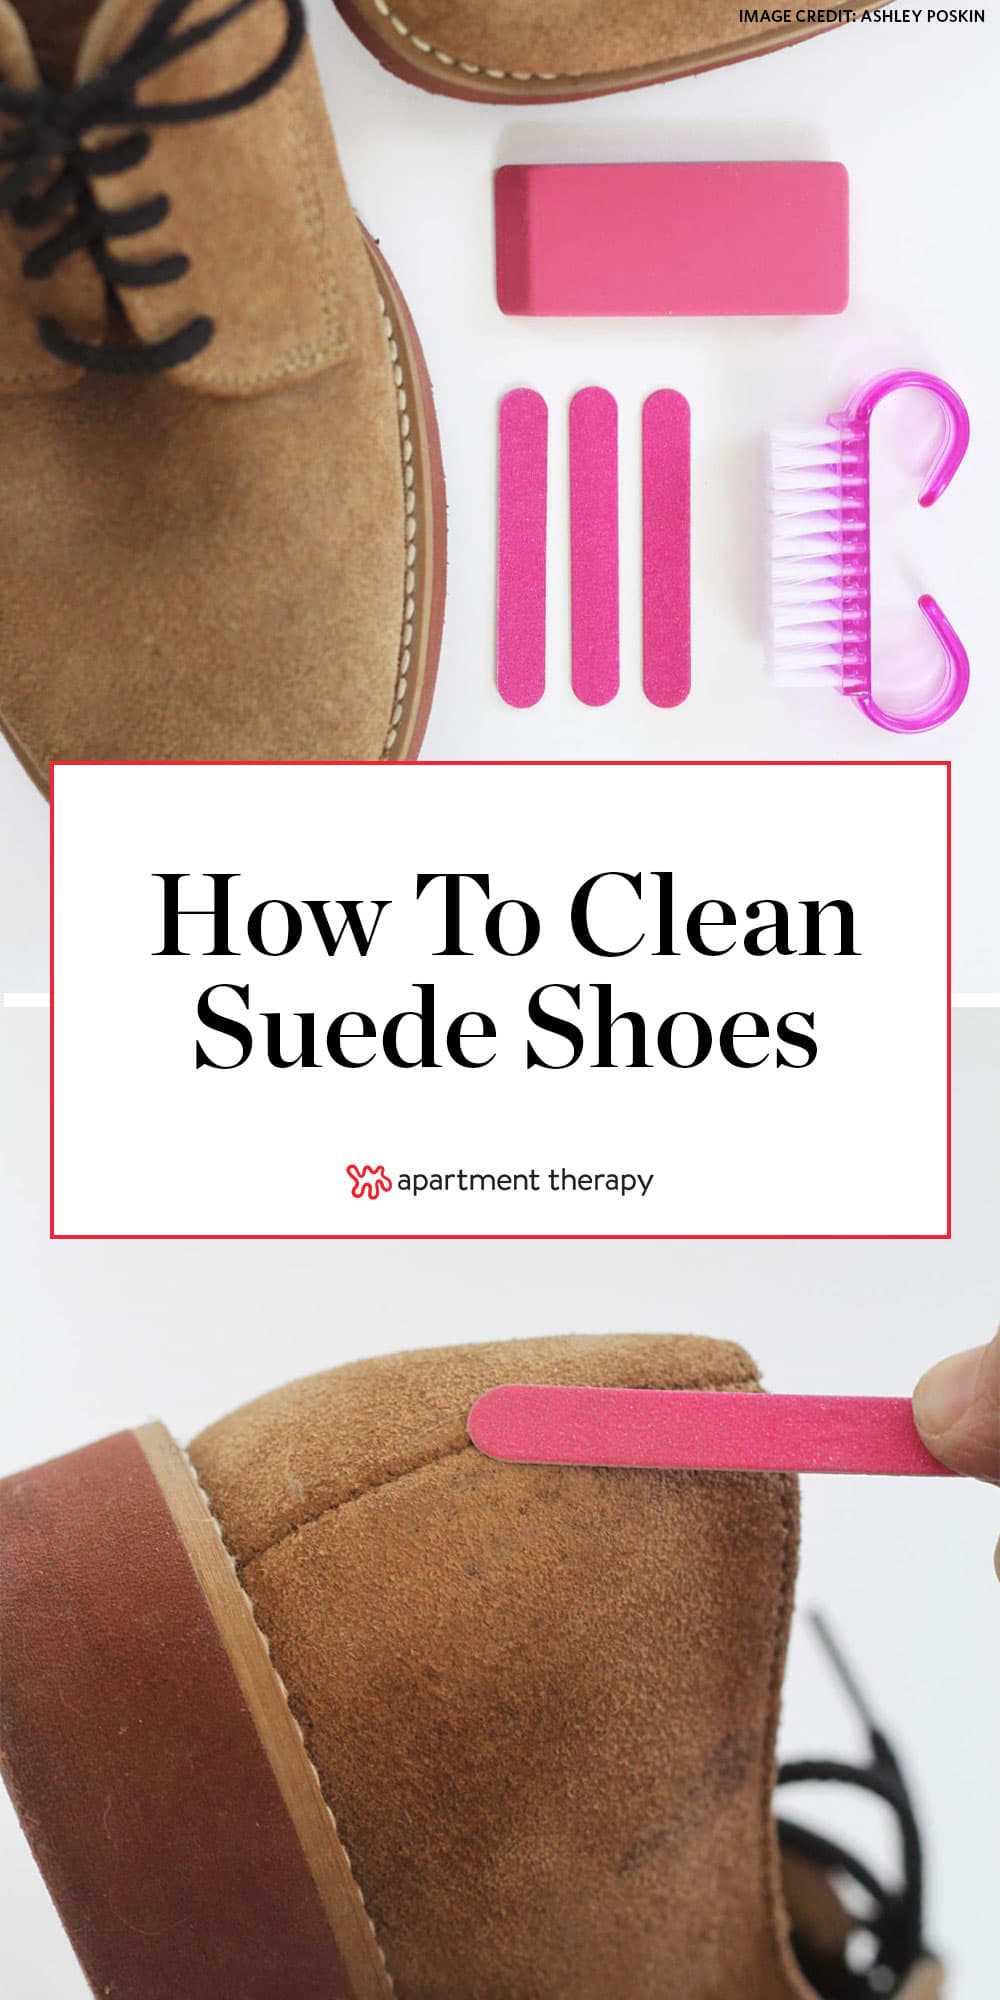 Using a Suede Stain Remover